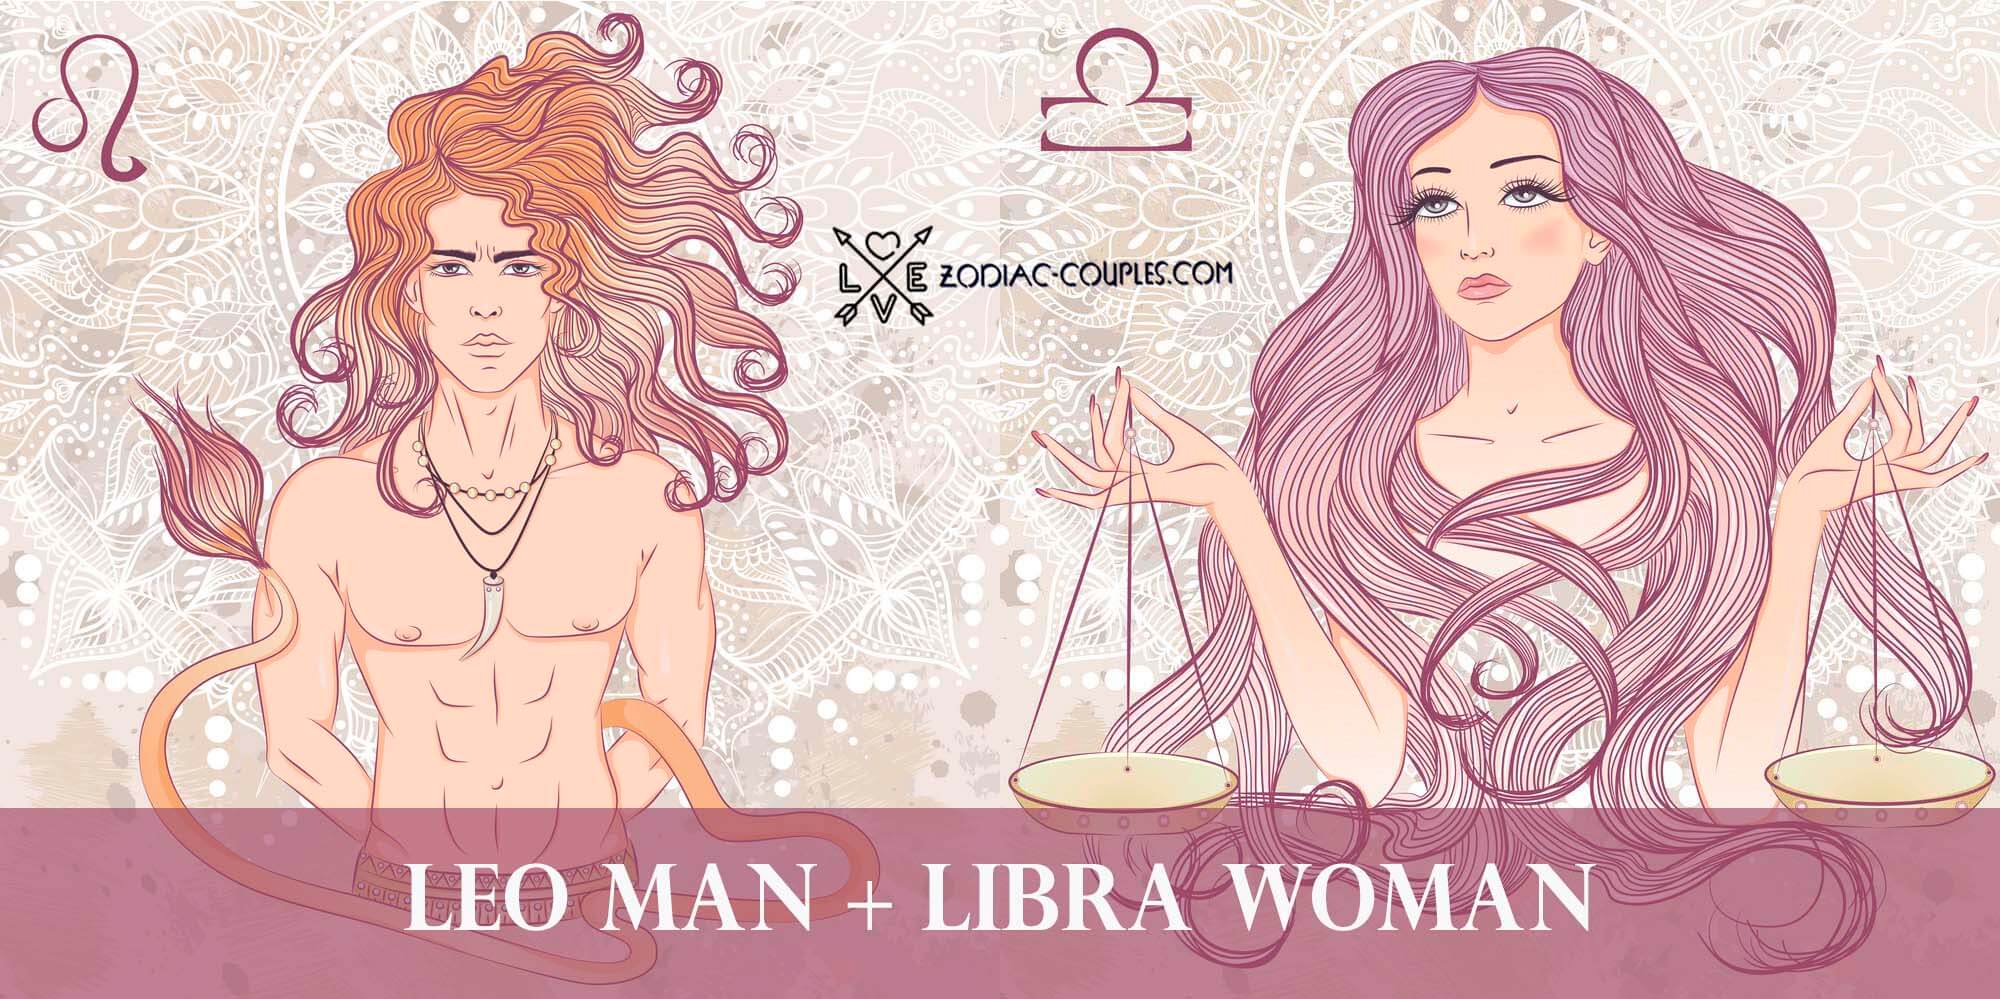 Leo man and Libra woman: Celebrity Couples and Compatibility ♌♎- Zodiac Cou...